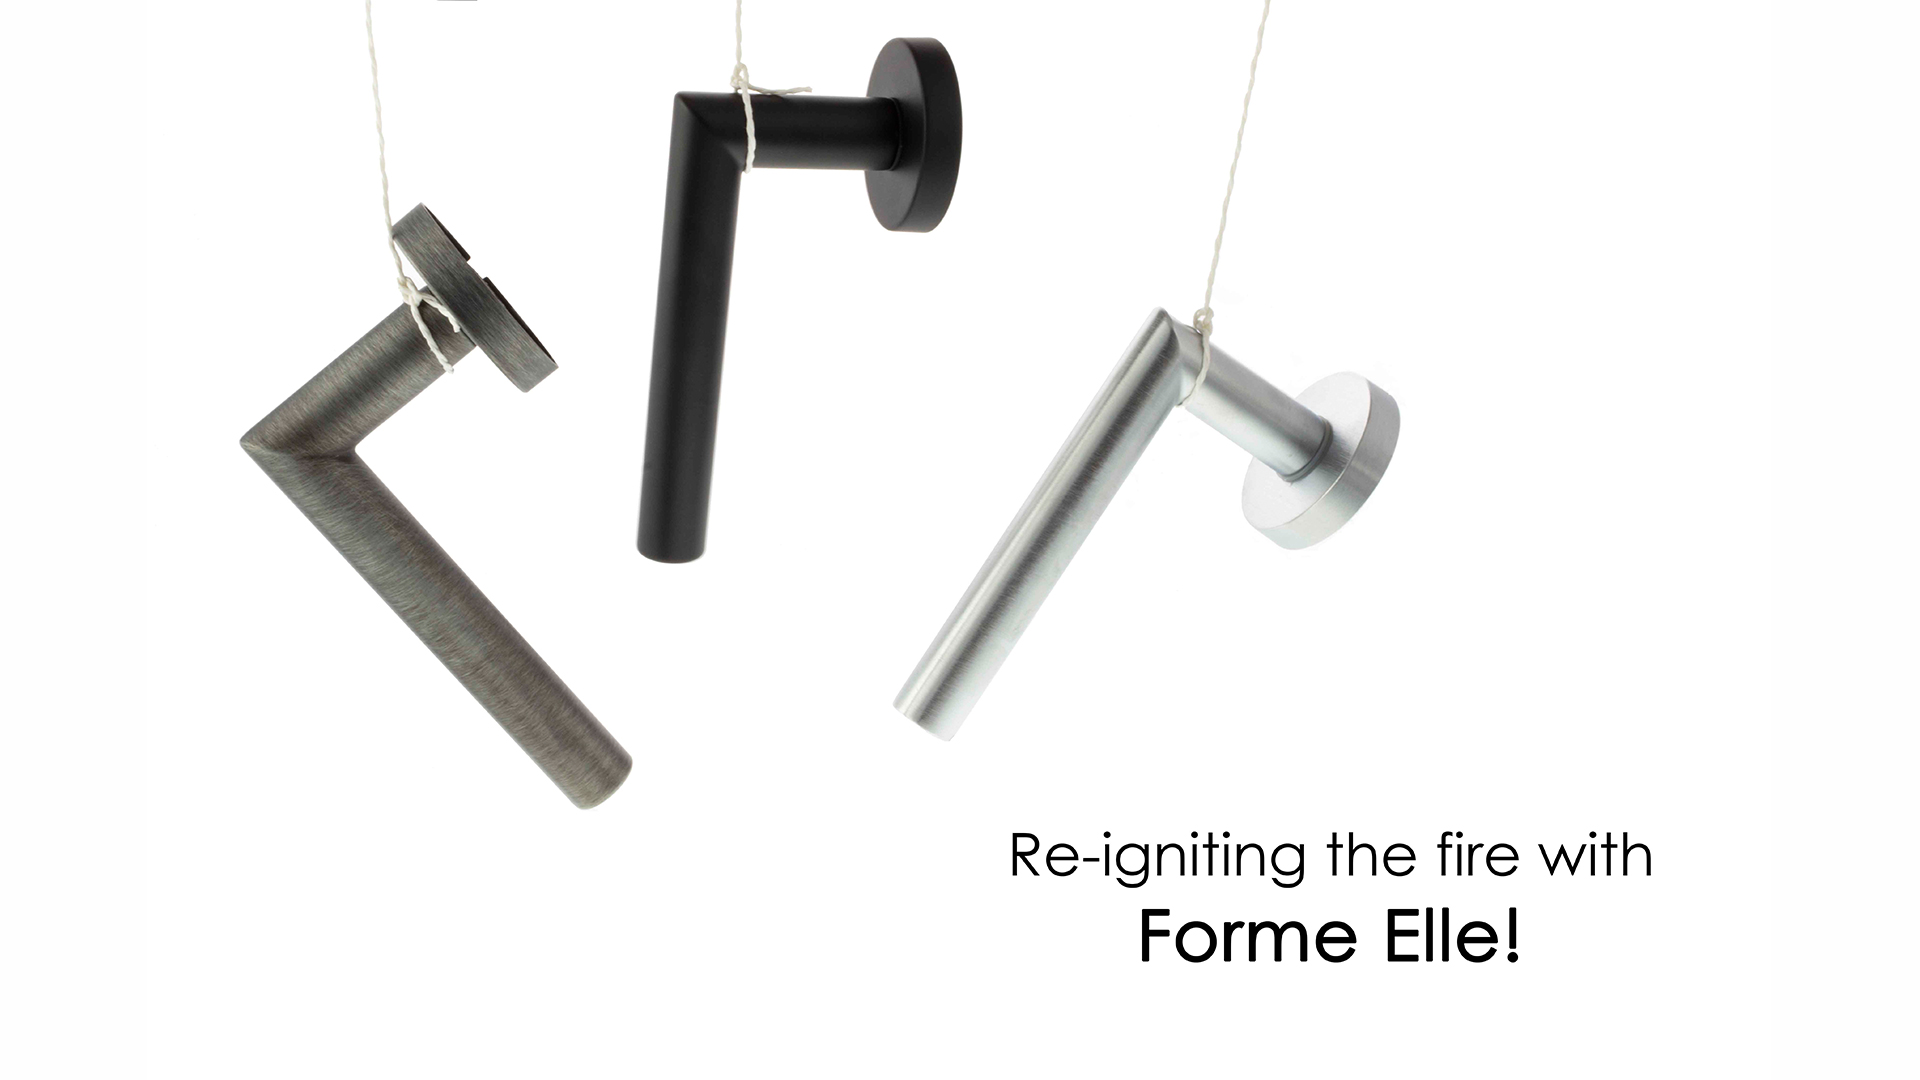 Re-igniting the fire with Forme Elle